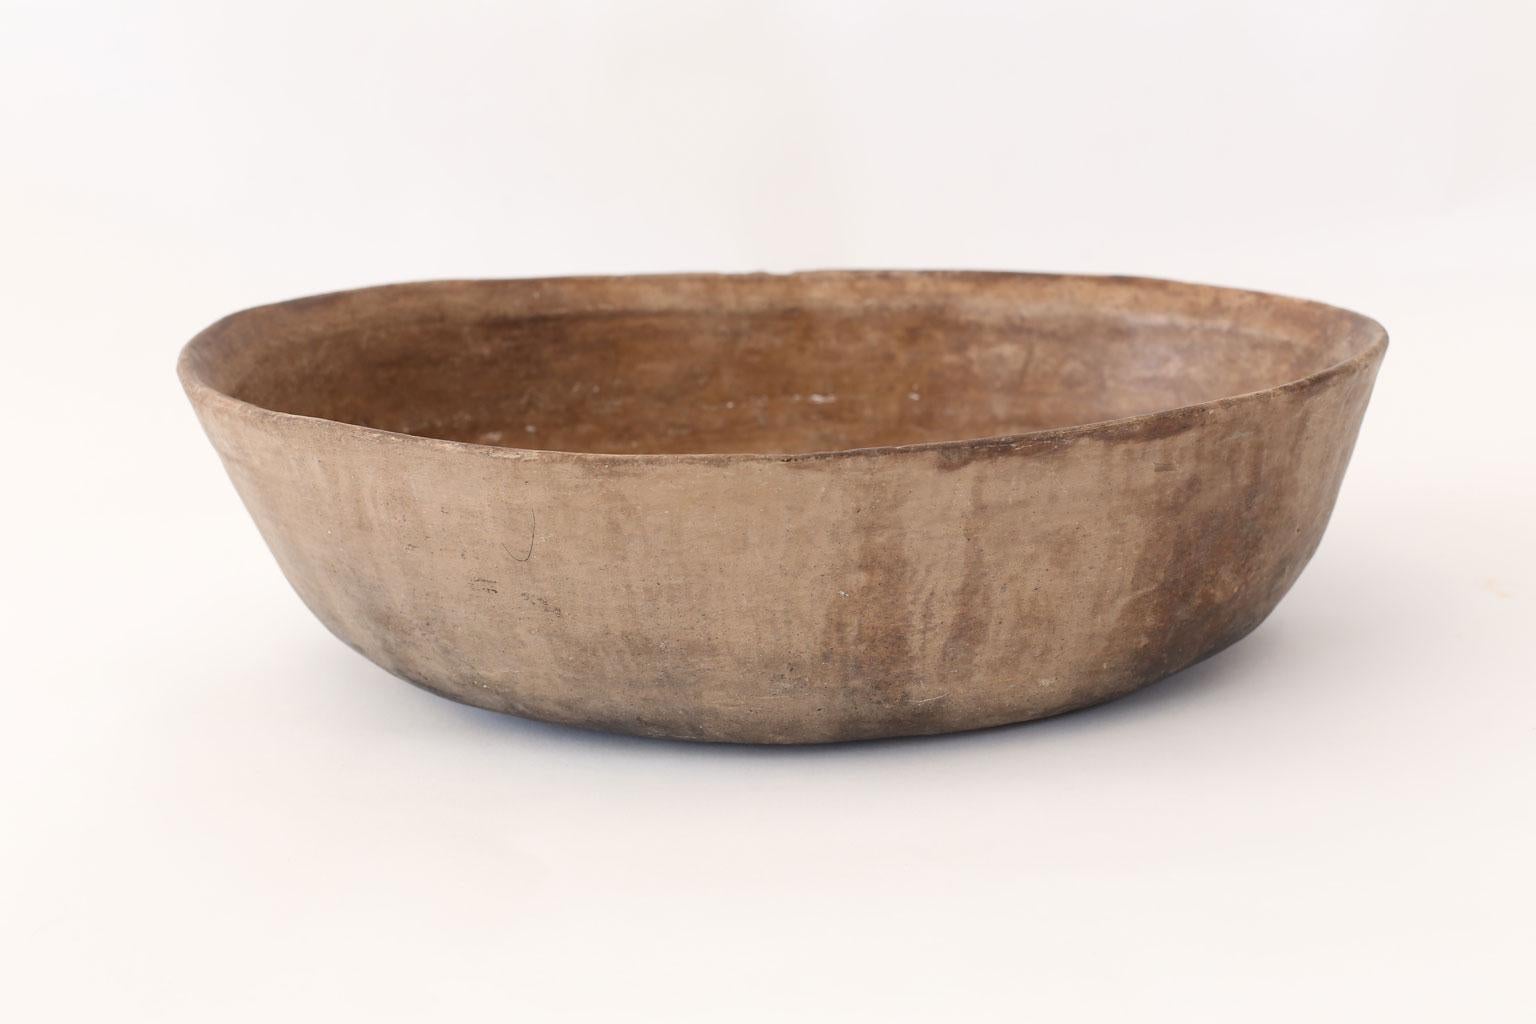 Primitive clay cooking bowl from Los Reyes Metzontla, Mexico. This vintage vessel is hand-sculpted, created and used circa 1950 by the indigenous population of the isolated Mexican highlands of Puebla (Zapotitlán). Exhibiting a nice rich patina,